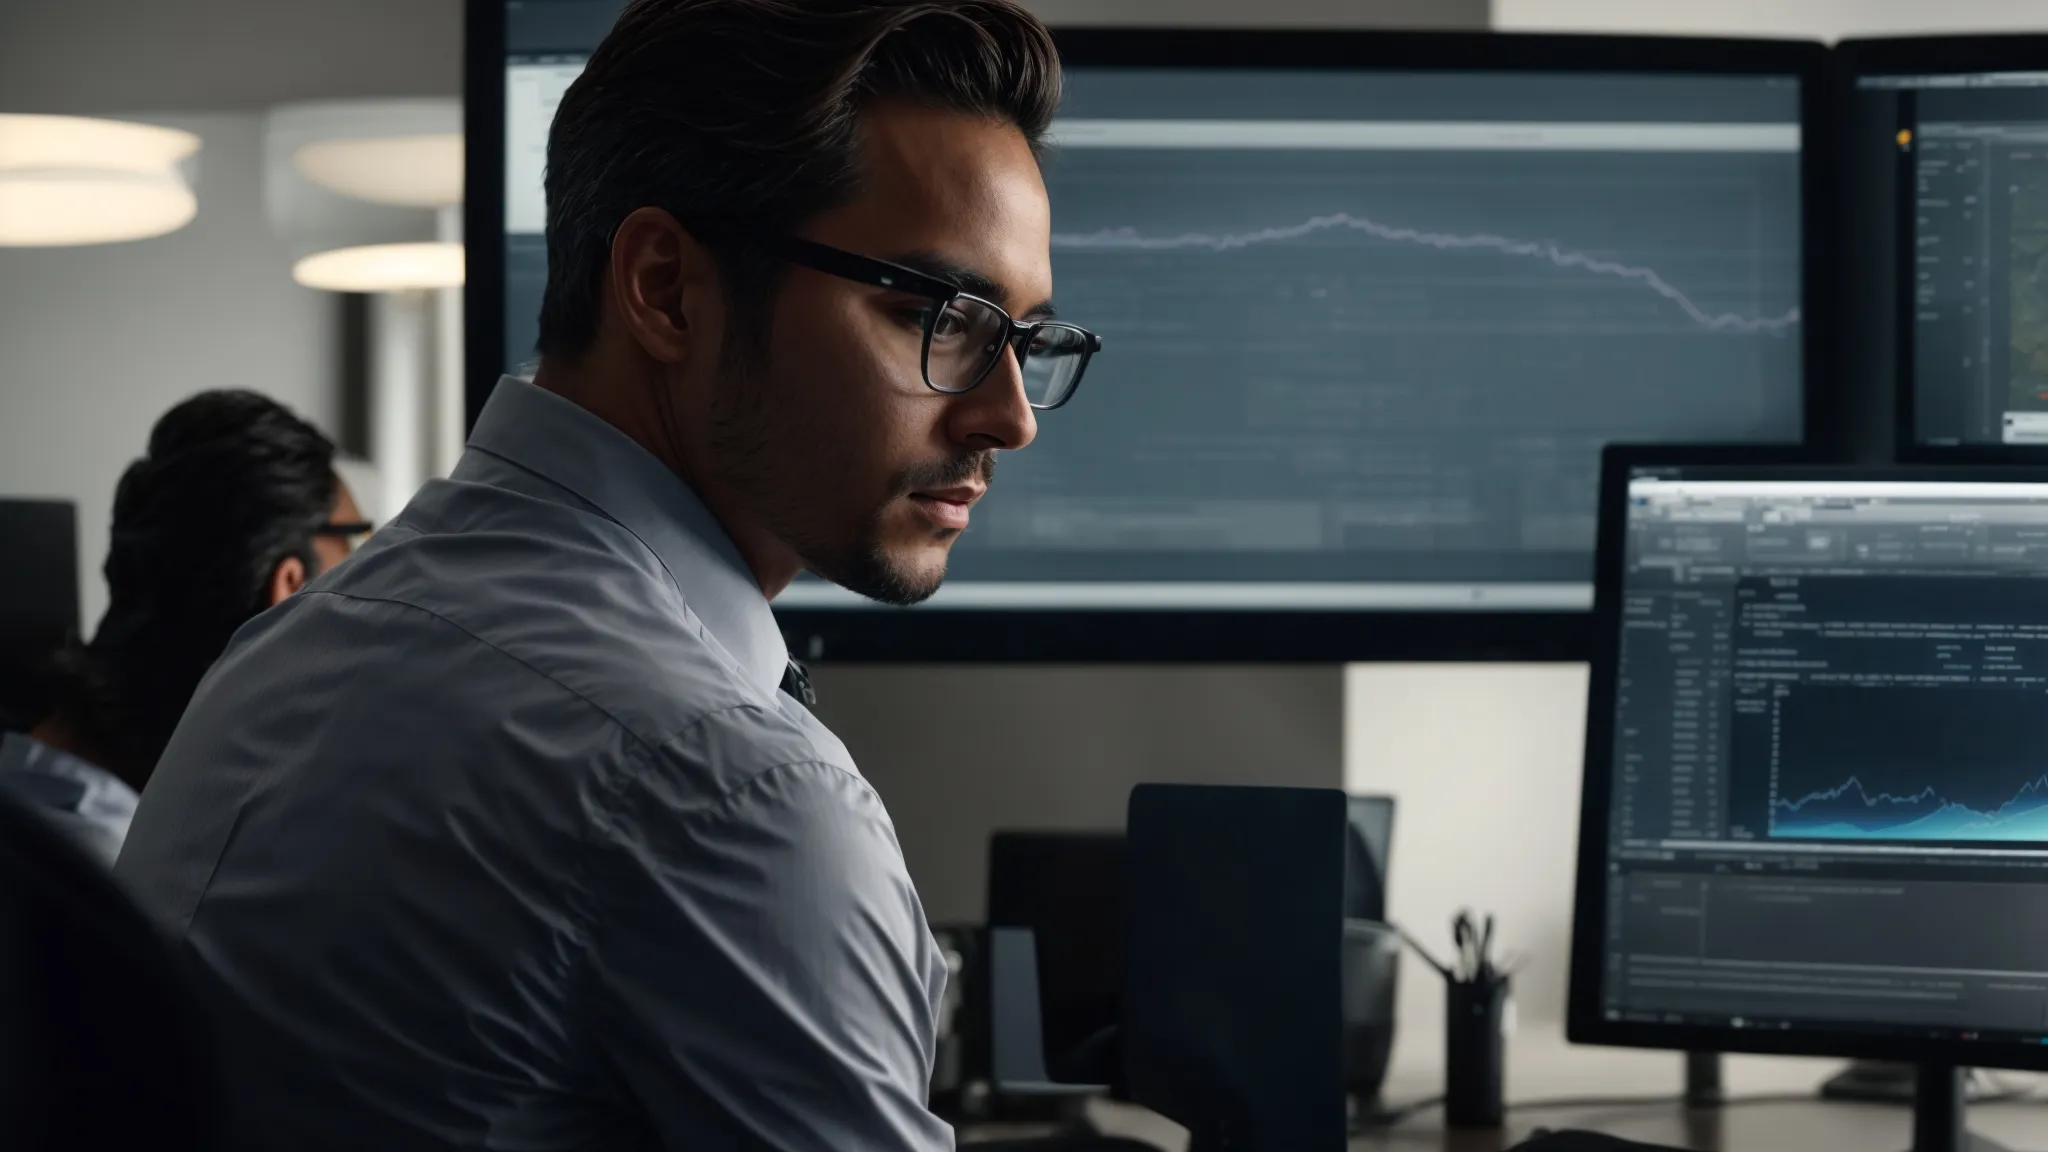 a professional wearing glasses intently reviews video analytics on a large desktop monitor in a modern office setting.